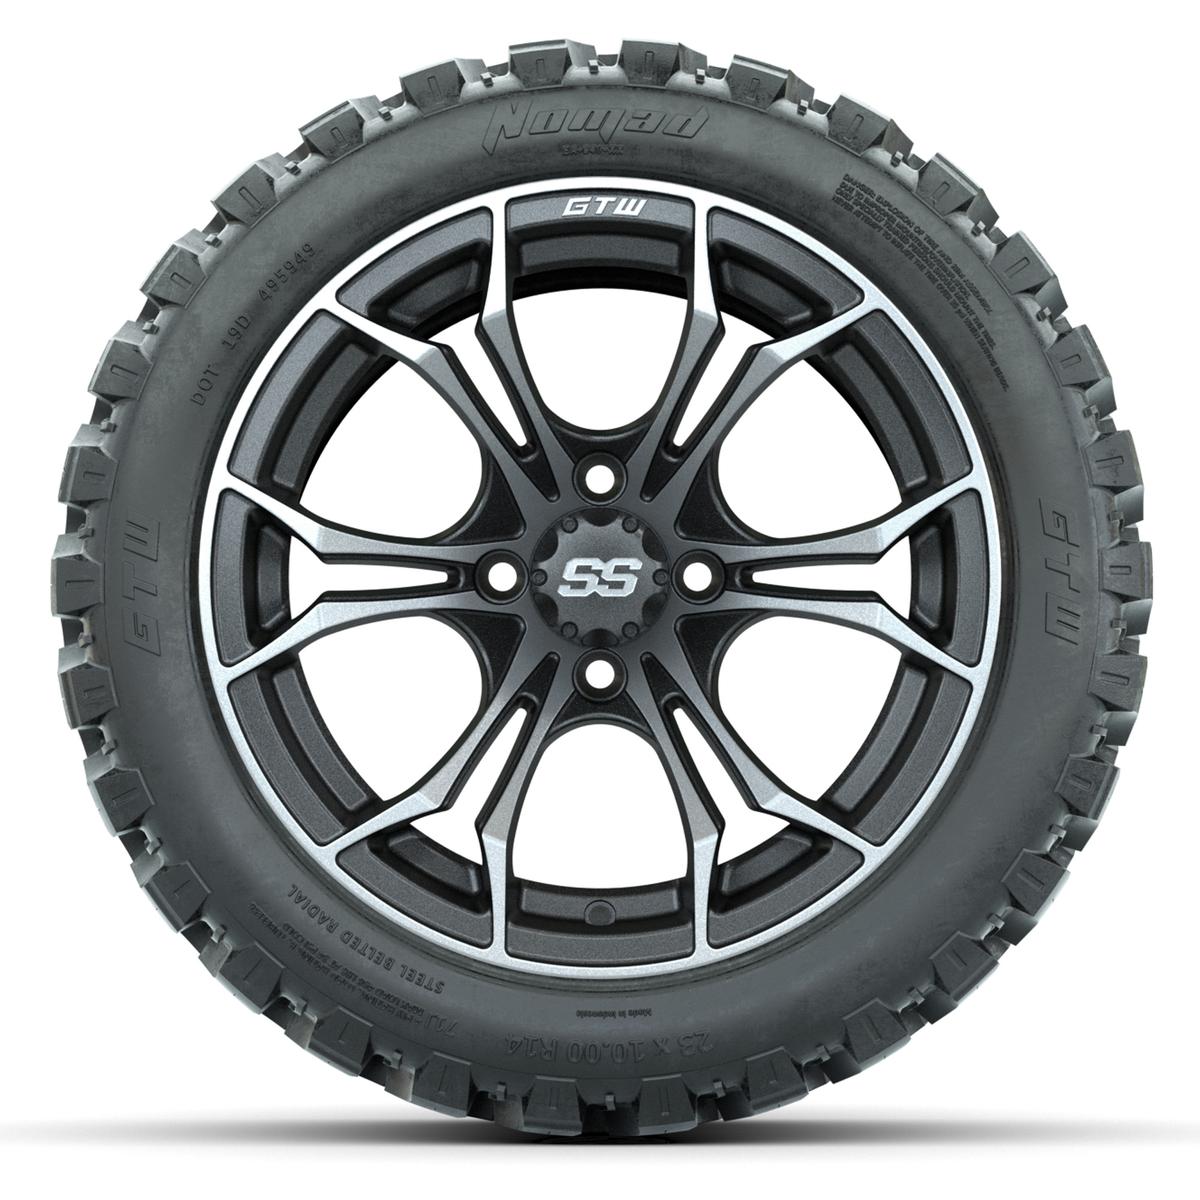 GTW Spyder Matte Grey 14 in Wheels with 23x10-14 GTW Nomad All-Terrain Tires – Full Set